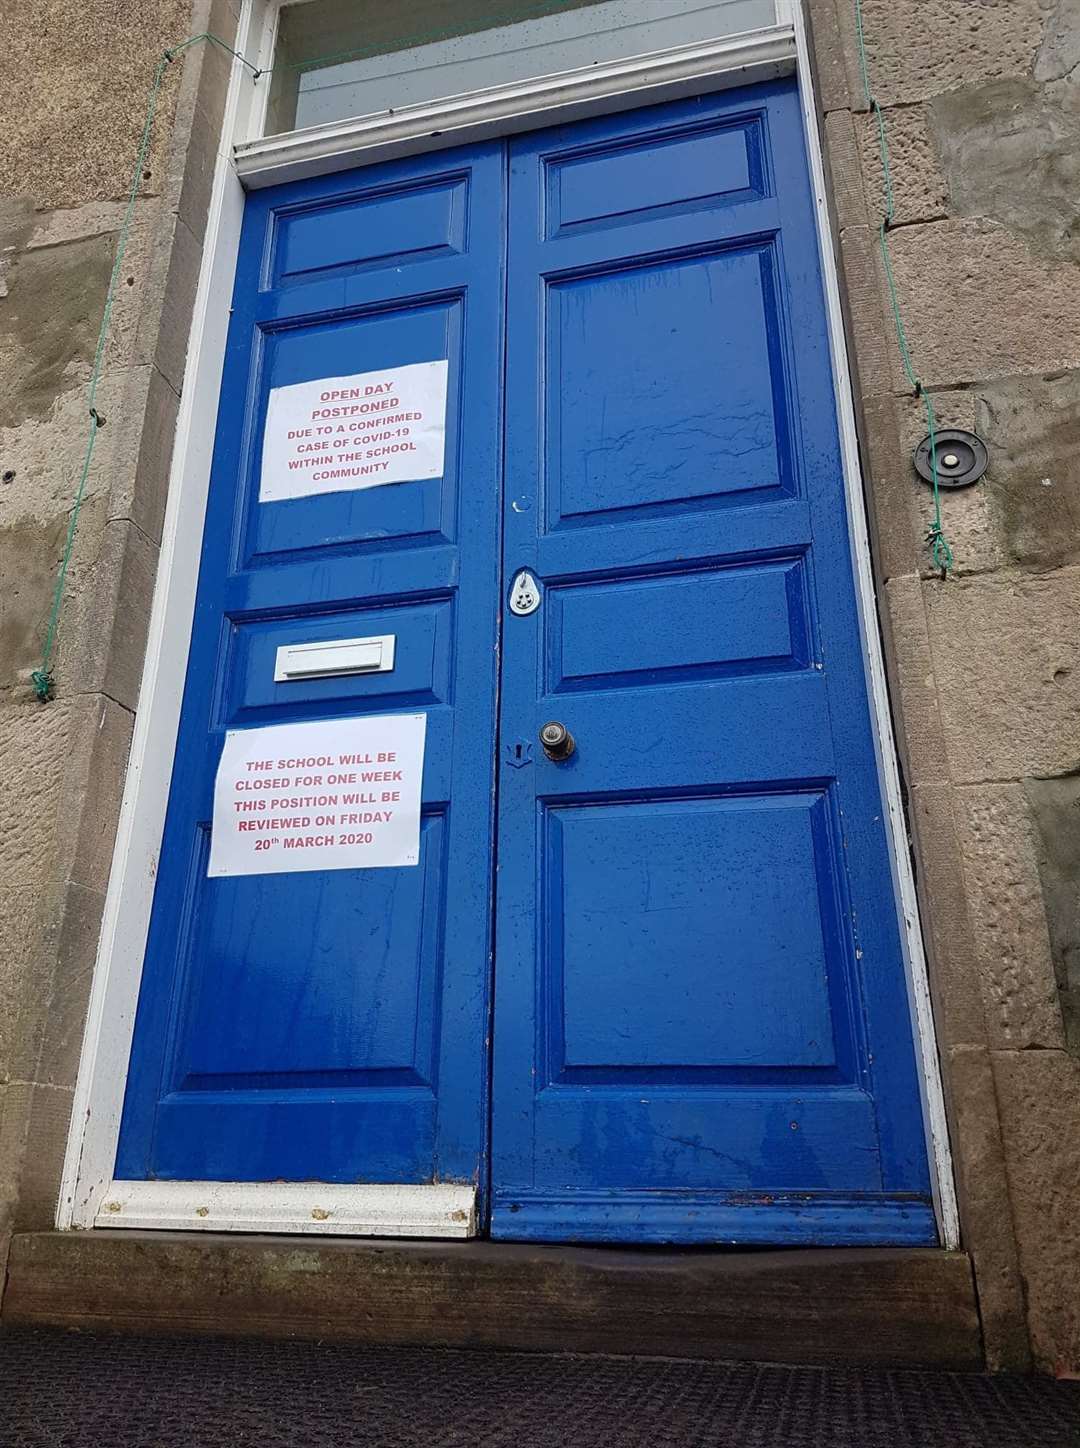 The notices on the door.